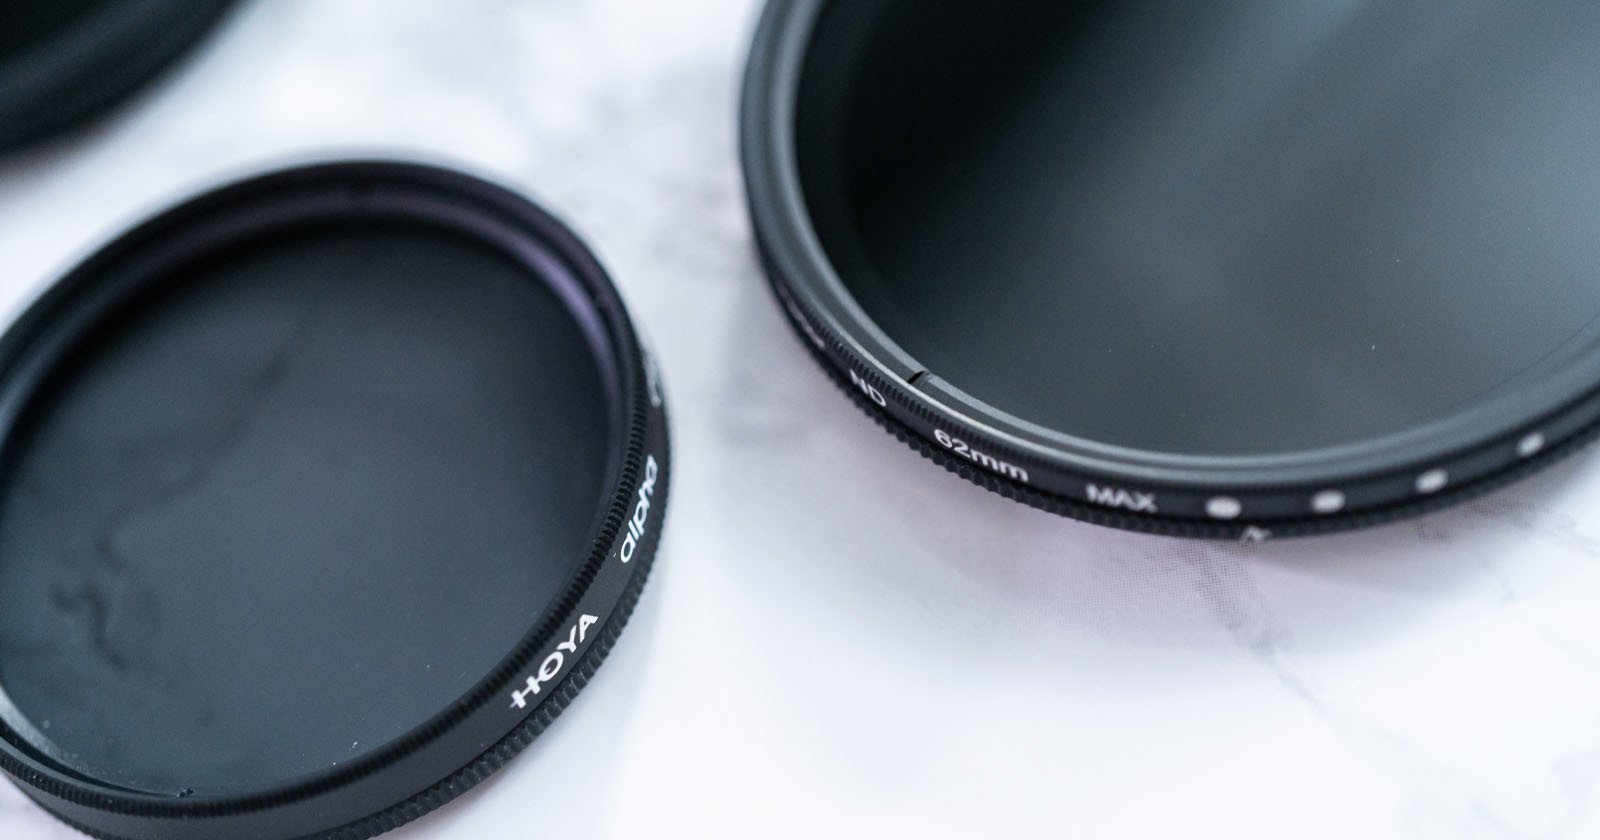 The Best ND Filters You Can Buy in 2022